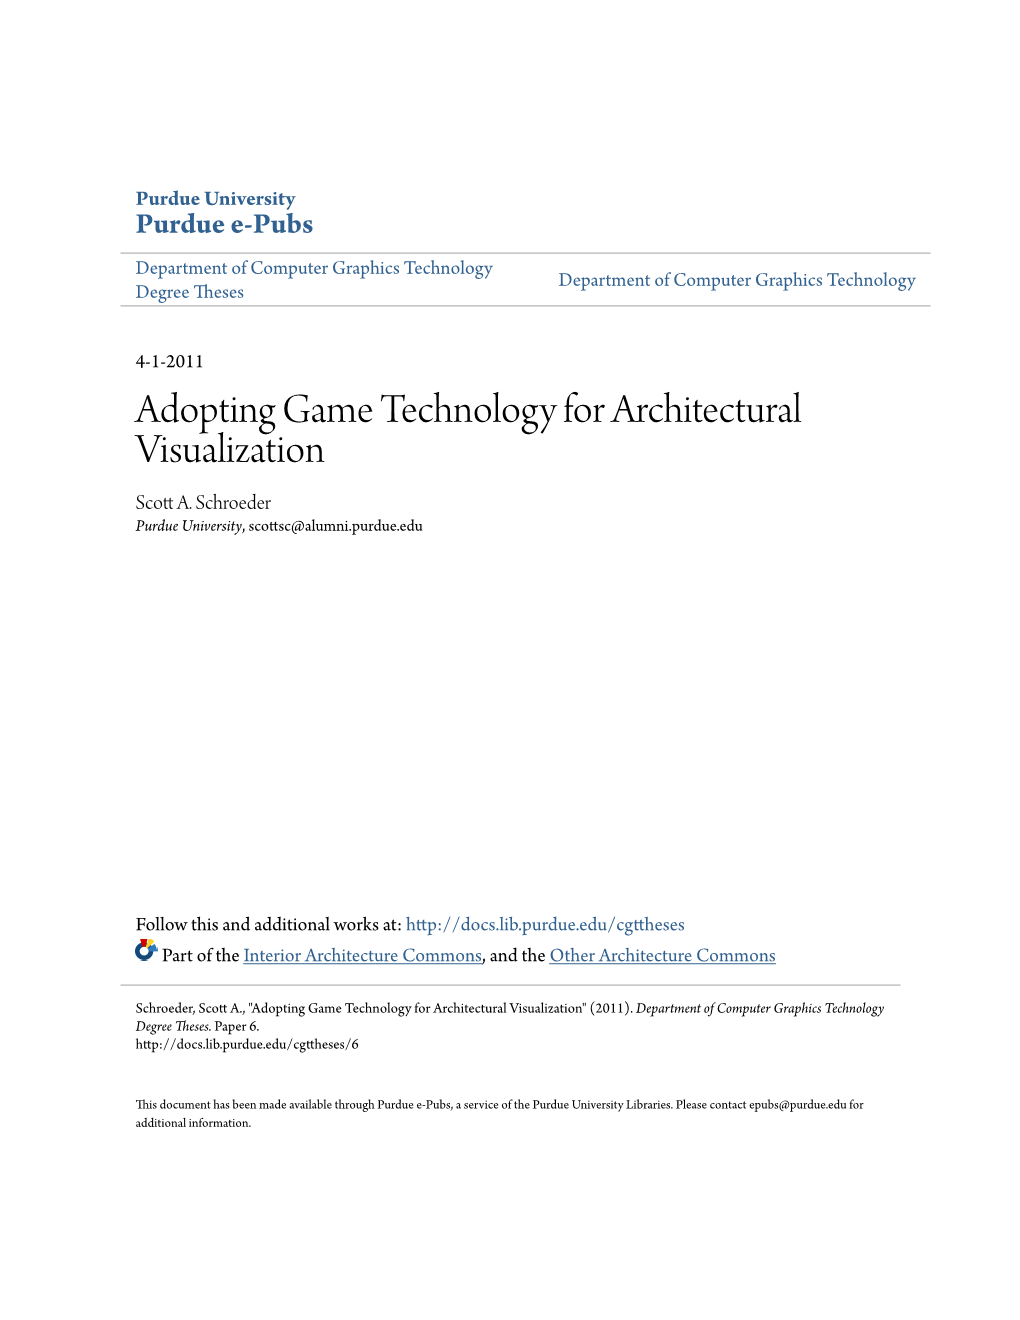 Adopting Game Technology for Architectural Visualization Scott A